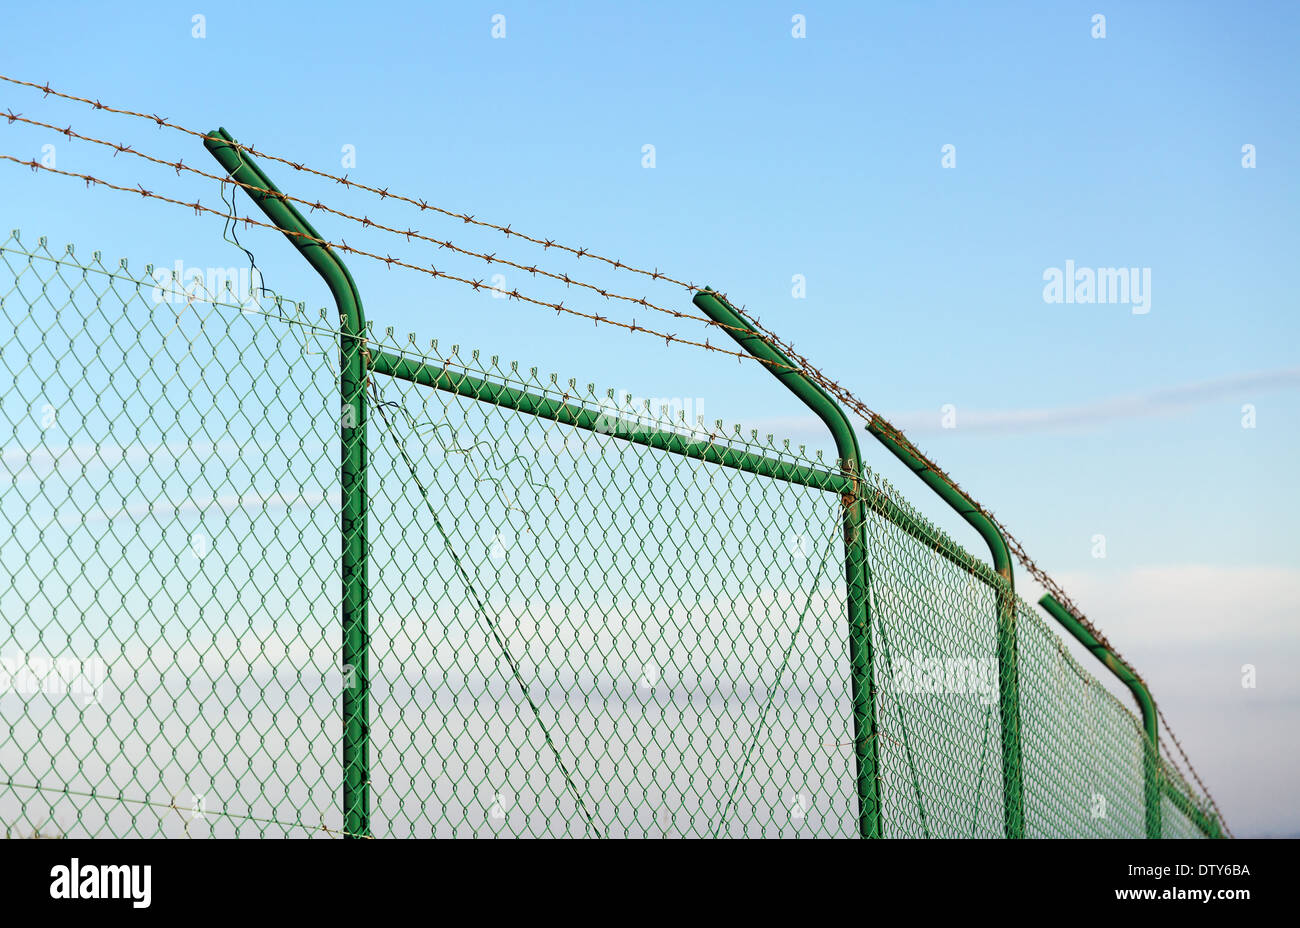 Mesh fence with barbed wire on a background of blue sky Stock Photo